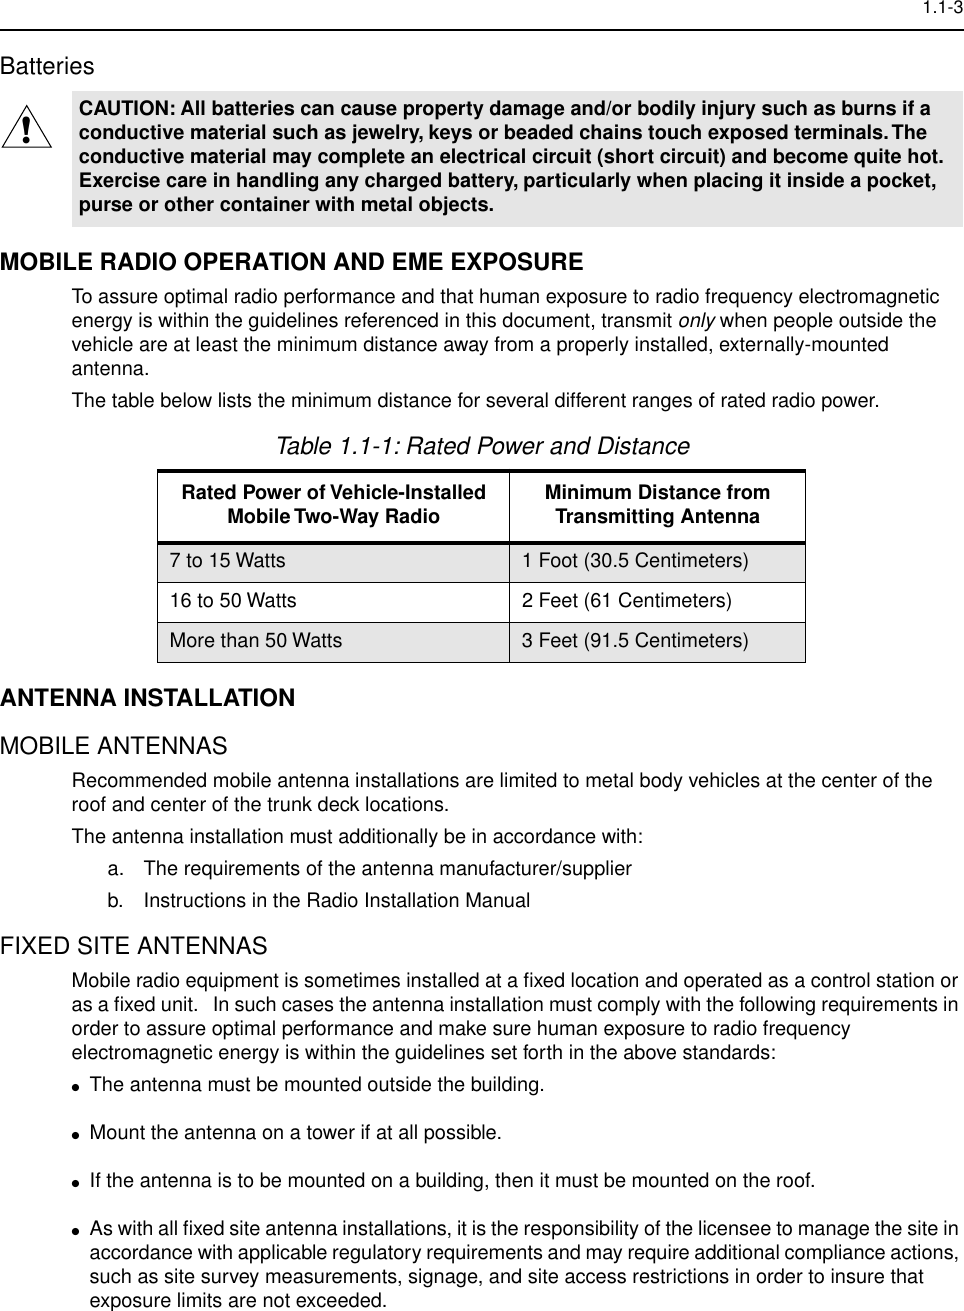  1.1-3 Batteries MOBILE RADIO OPERATION AND EME EXPOSURE To assure optimal radio performance and that human exposure to radio frequency electromagnetic energy is within the guidelines referenced in this document, transmit  only  when people outside the vehicle are at least the minimum distance away from a properly installed, externally-mounted antenna.The table below lists the minimum distance for several different ranges of rated radio power. ANTENNA INSTALLATION MOBILE ANTENNAS Recommended mobile antenna installations are limited to metal body vehicles at the center of the roof and center of the trunk deck locations.The antenna installation must additionally be in accordance with: a. The requirements of the antenna manufacturer/supplierb. Instructions in the Radio Installation Manual FIXED SITE ANTENNAS  Mobile radio equipment is sometimes installed at a ﬁxed location and operated as a control station or as a ﬁxed unit.   In such cases the antenna installation must comply with the following requirements in order to assure optimal performance and make sure human exposure to radio frequency electromagnetic energy is within the guidelines set forth in the above standards: ● The antenna must be mounted outside the building. ● Mount the antenna on a tower if at all possible. ● If the antenna is to be mounted on a building, then it must be mounted on the roof. ● As with all ﬁxed site antenna installations, it is the responsibility of the licensee to manage the site in accordance with applicable regulatory requirements and may require additional compliance actions, such as site survey measurements, signage, and site access restrictions in order to insure that exposure limits are not exceeded. CAUTION: All batteries can cause property damage and/or bodily injury such as burns if a conductive material such as jewelry, keys or beaded chains touch exposed terminals. The conductive material may complete an electrical circuit (short circuit) and become quite hot. Exercise care in handling any charged battery, particularly when placing it inside a pocket, purse or other container with metal objects. Table 1.1-1: Rated Power and Distance Rated Power of Vehicle-Installed Mobile Two-Way Radio Minimum Distance from Transmitting Antenna 7 to 15 Watts 1 Foot (30.5 Centimeters)16 to 50 Watts 2 Feet (61 Centimeters)More than 50 Watts 3 Feet (91.5 Centimeters)!